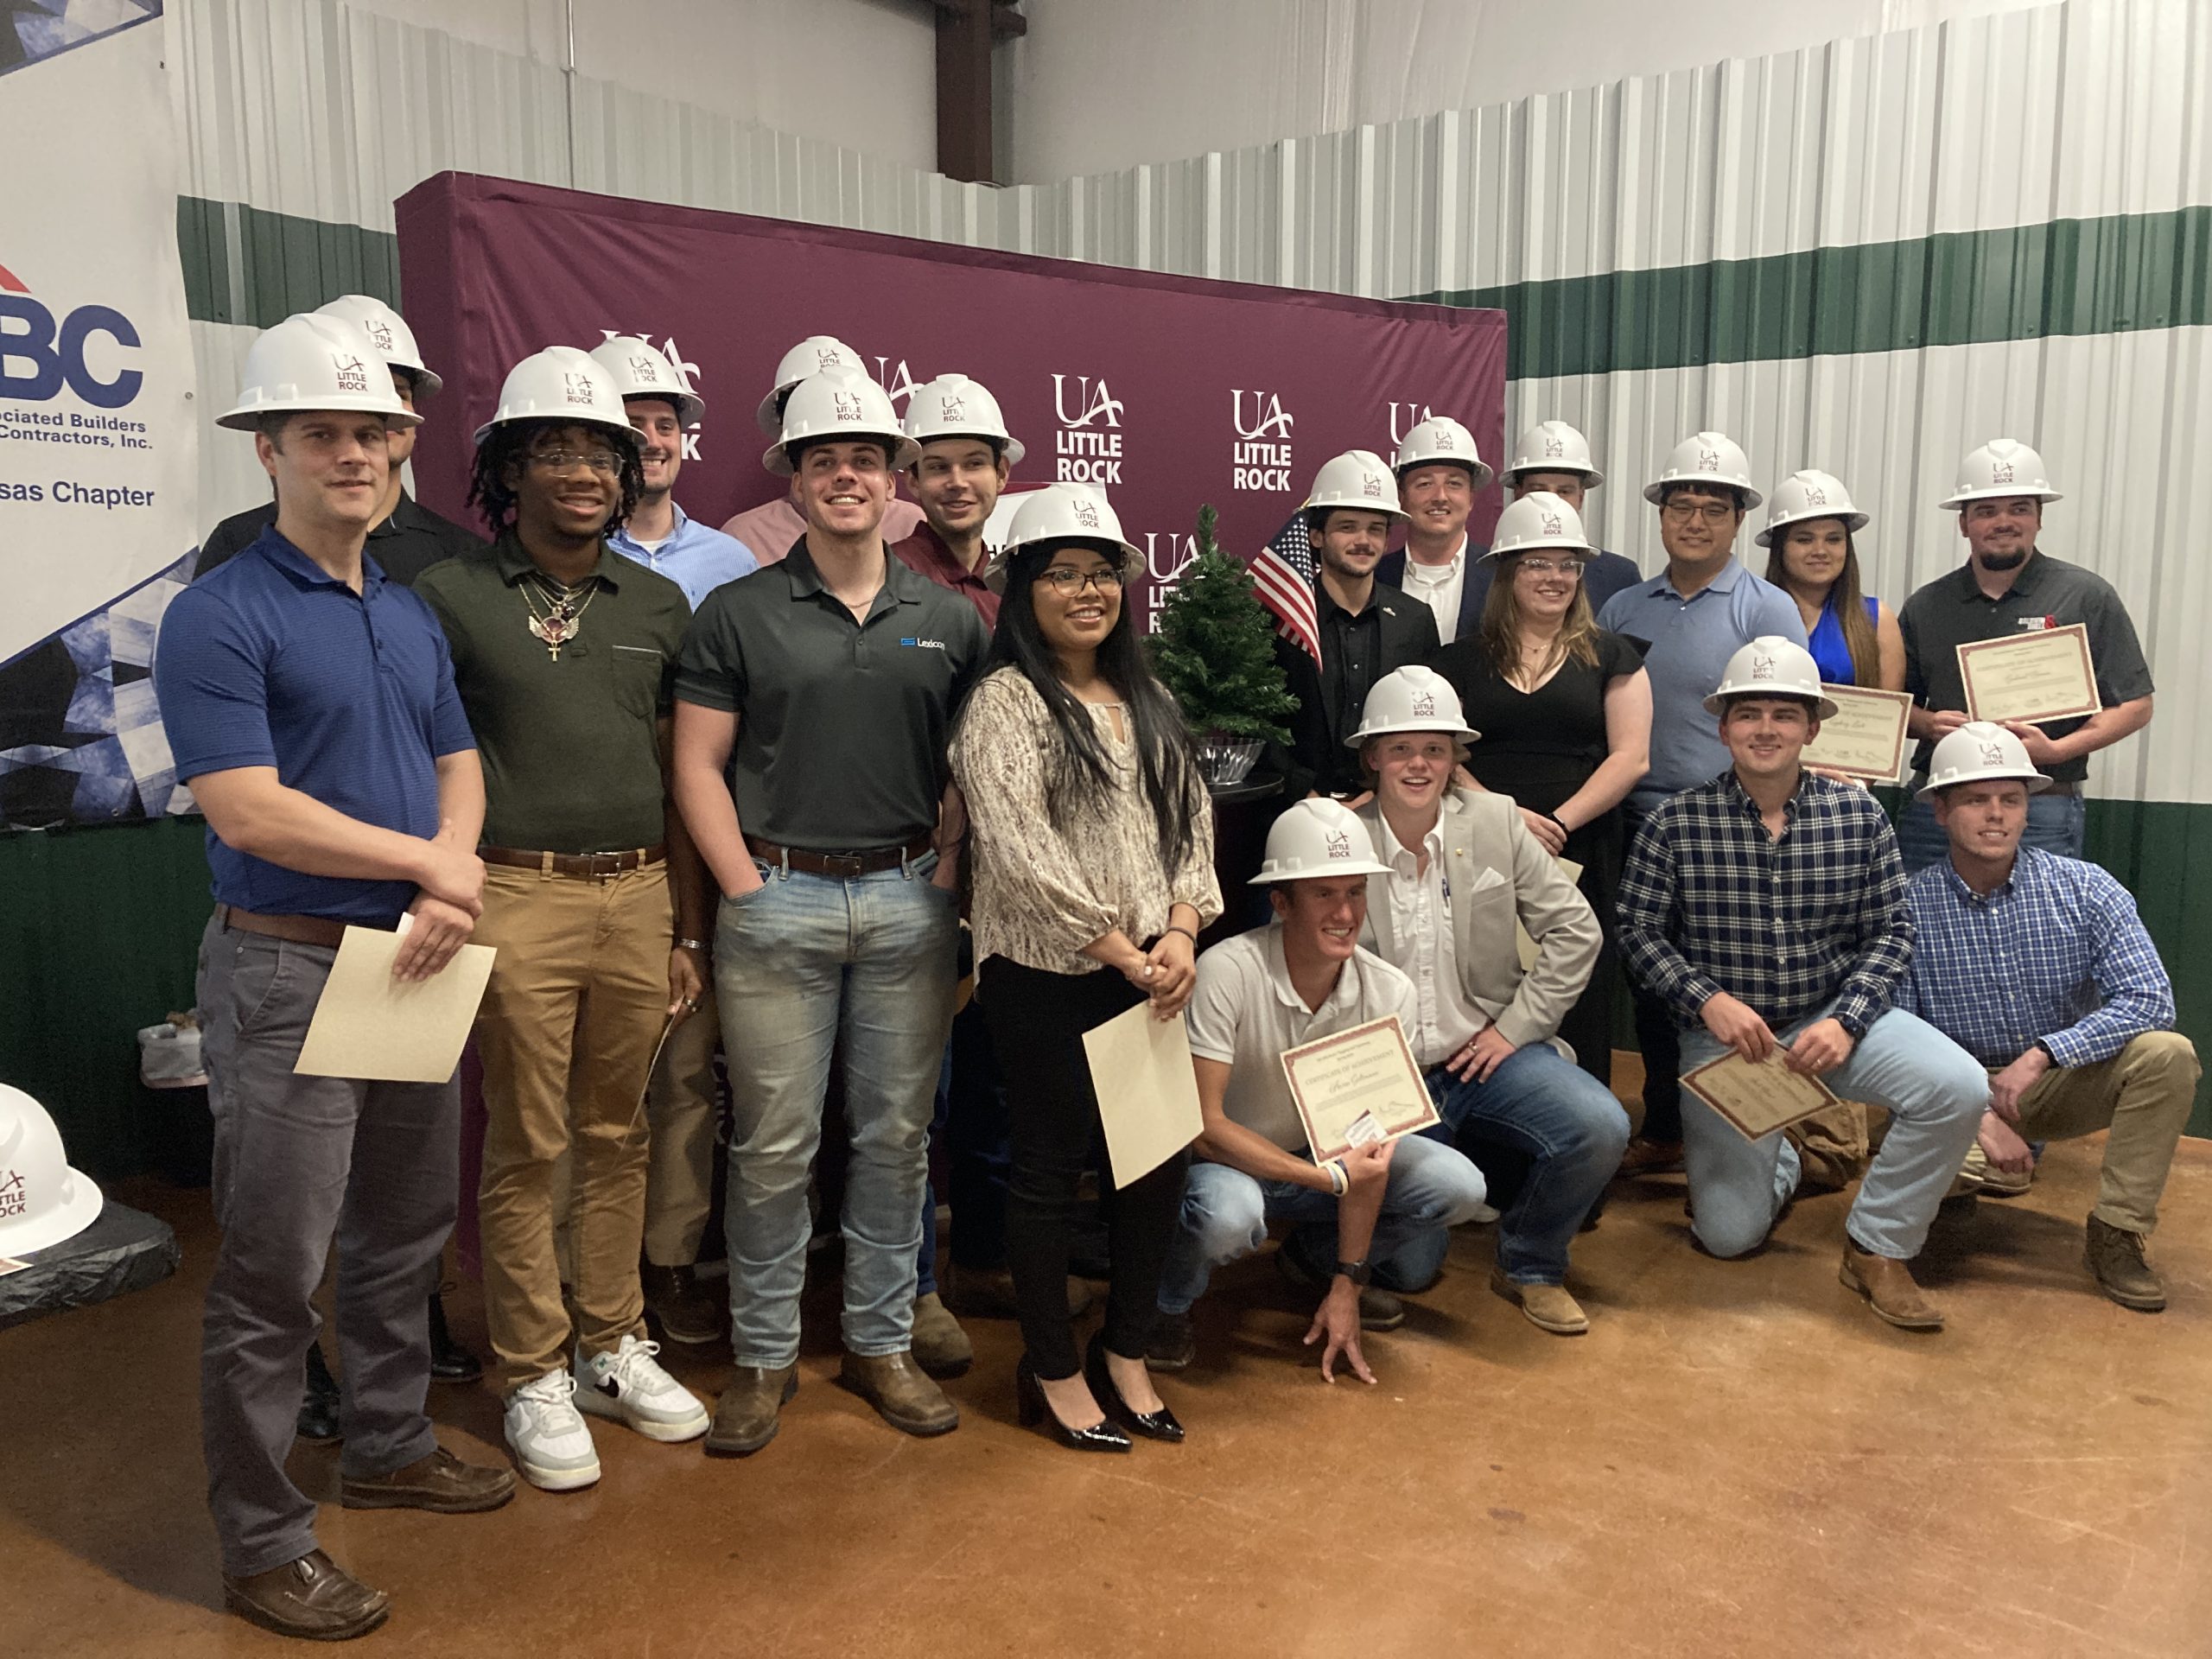 UA Little Rock honored 25 graduating students from the Department of Construction Management and Civil and Construction Engineering during the university’s second topping out ceremony.